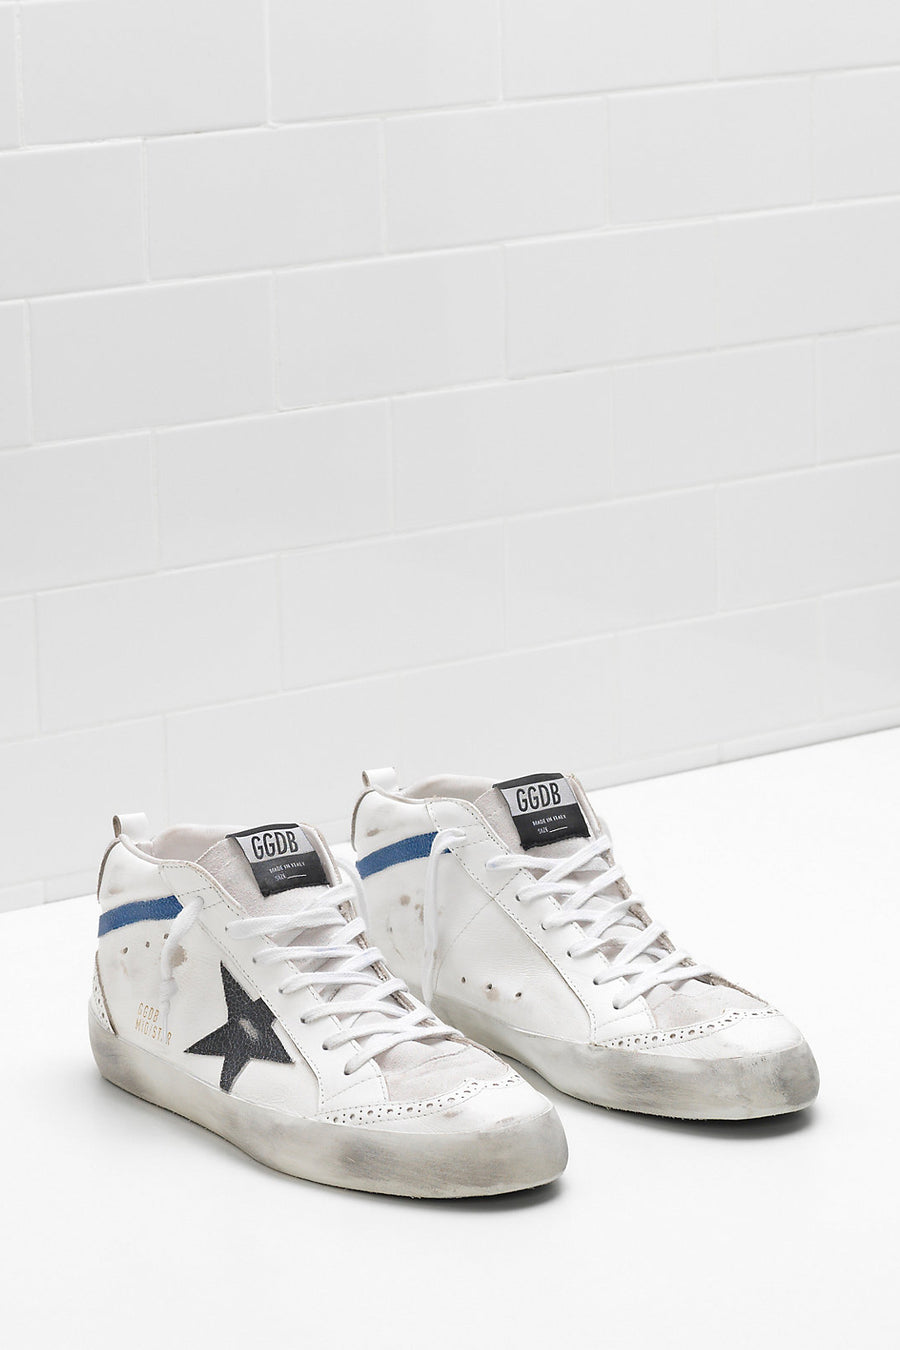 Mid Star - White Suede Black Wall Star - Pavilion